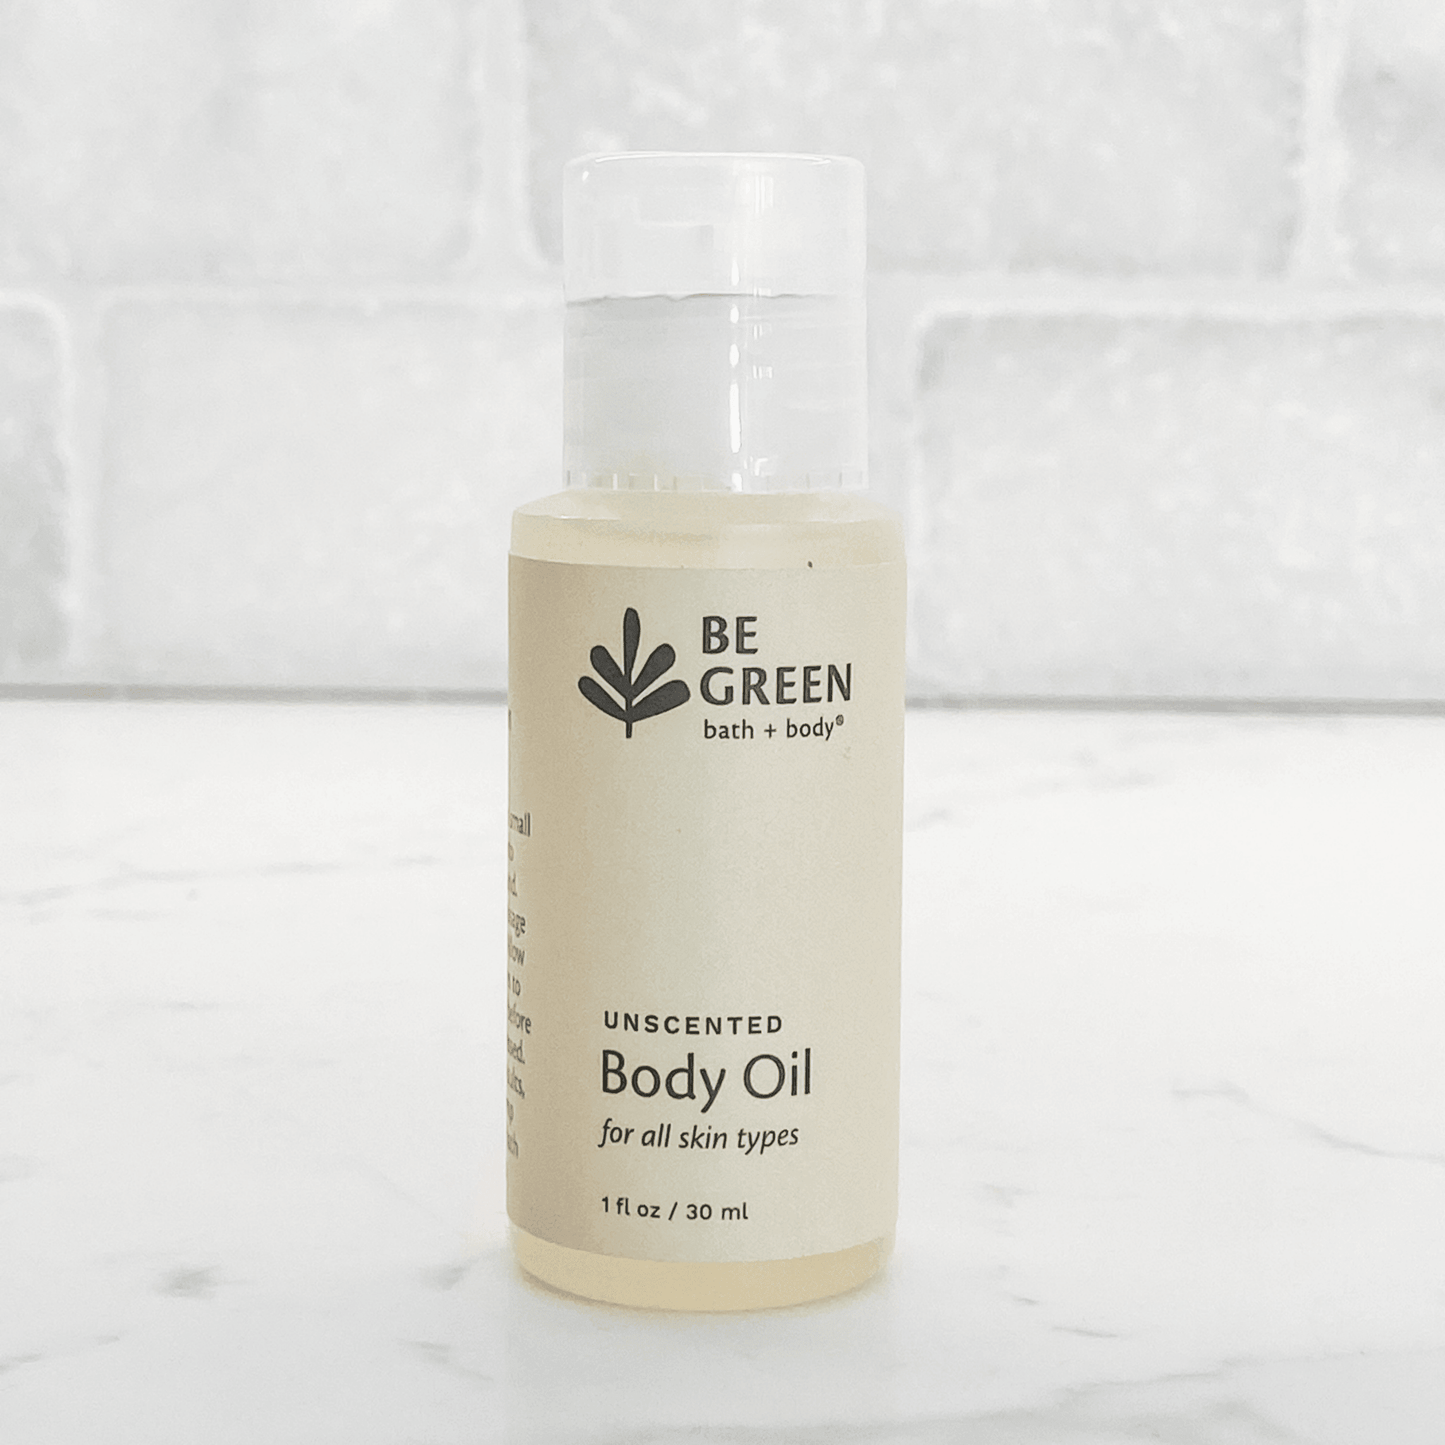 Be Green Bath and Body Body Oil Trial